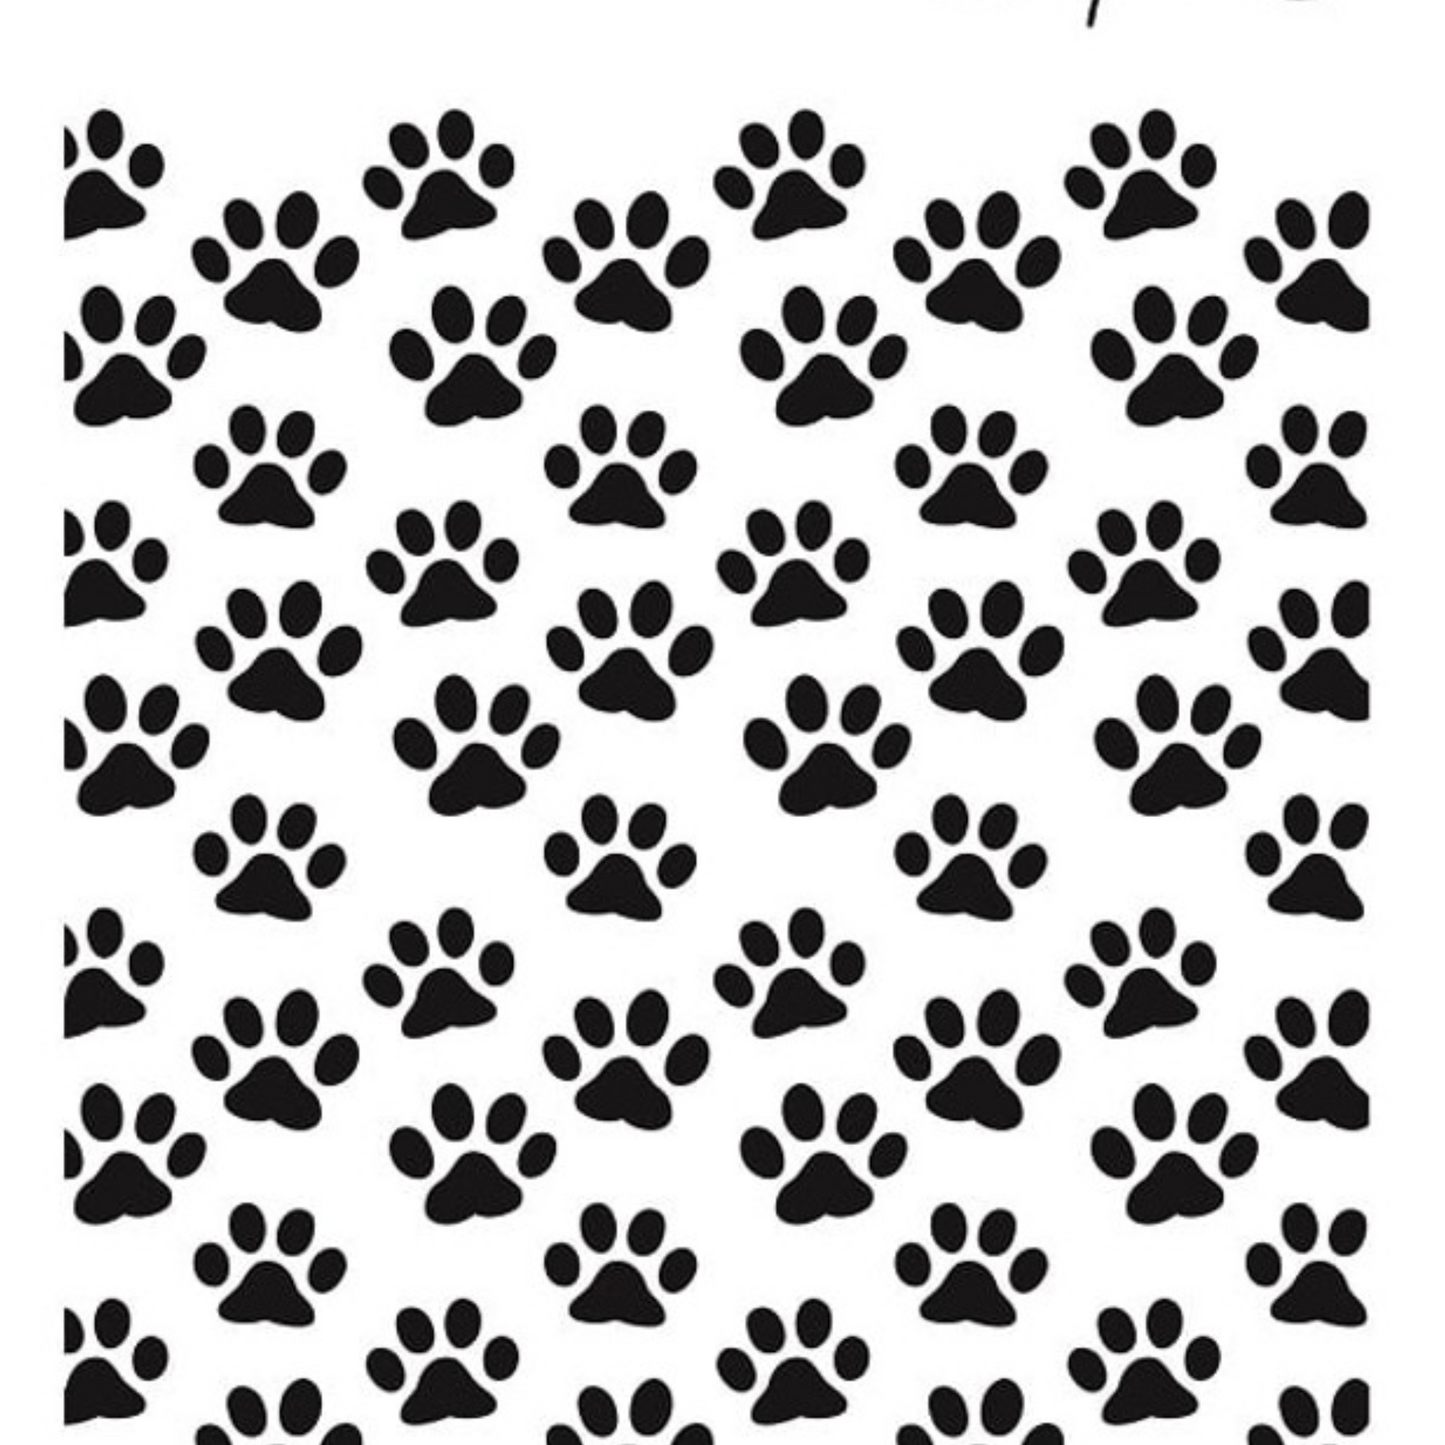 Paw Prints - Stencil by Snipart available at Milton's Daughter.